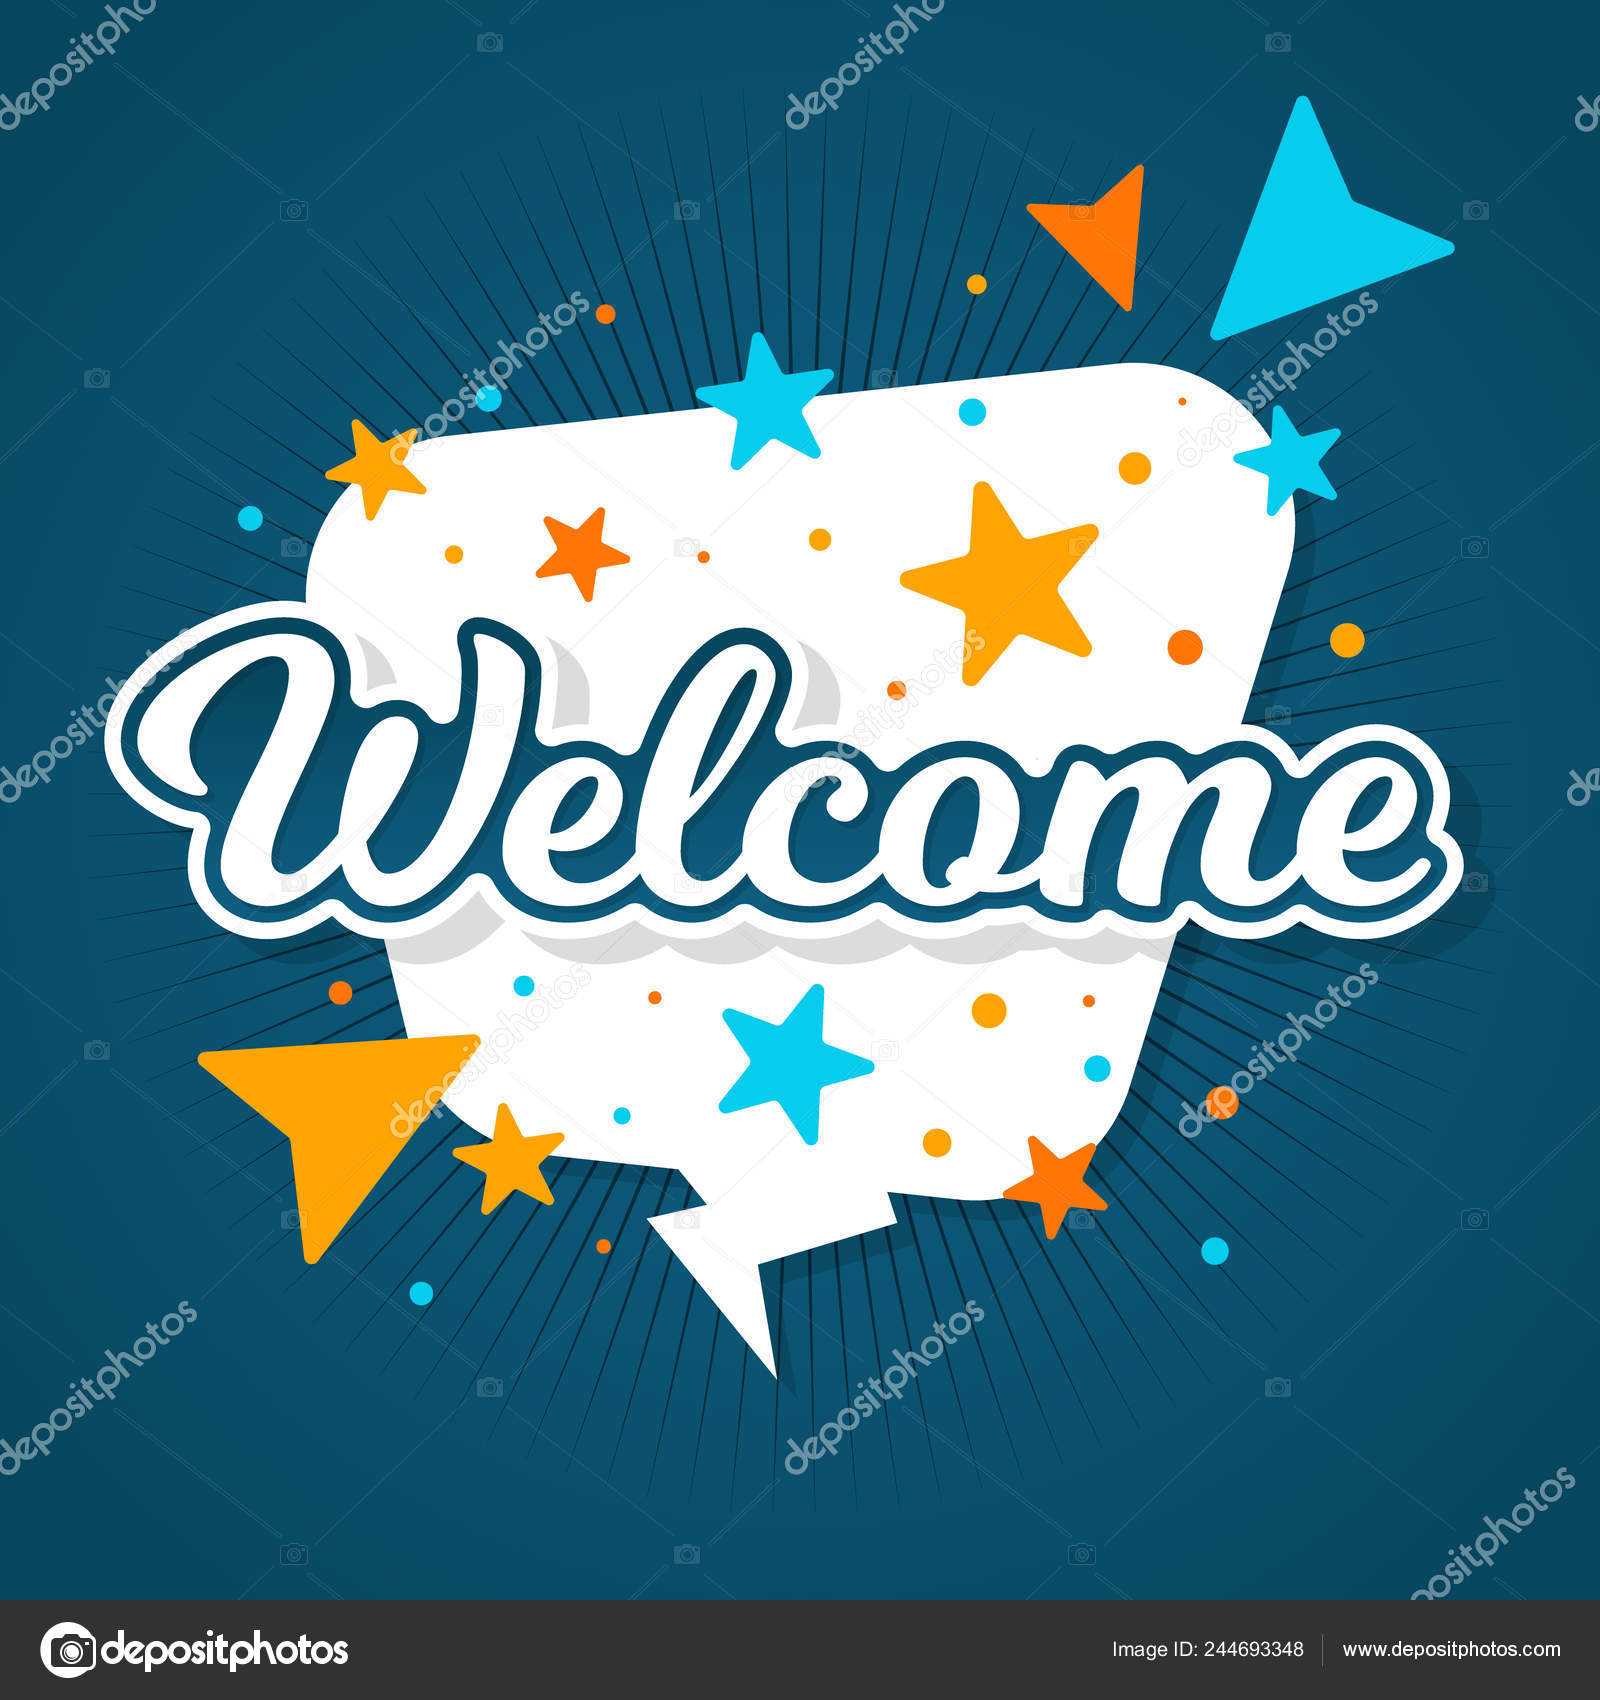 Welcome Letters Banner Flowing Liquid Shapes Template Design Regarding Welcome Banner Template